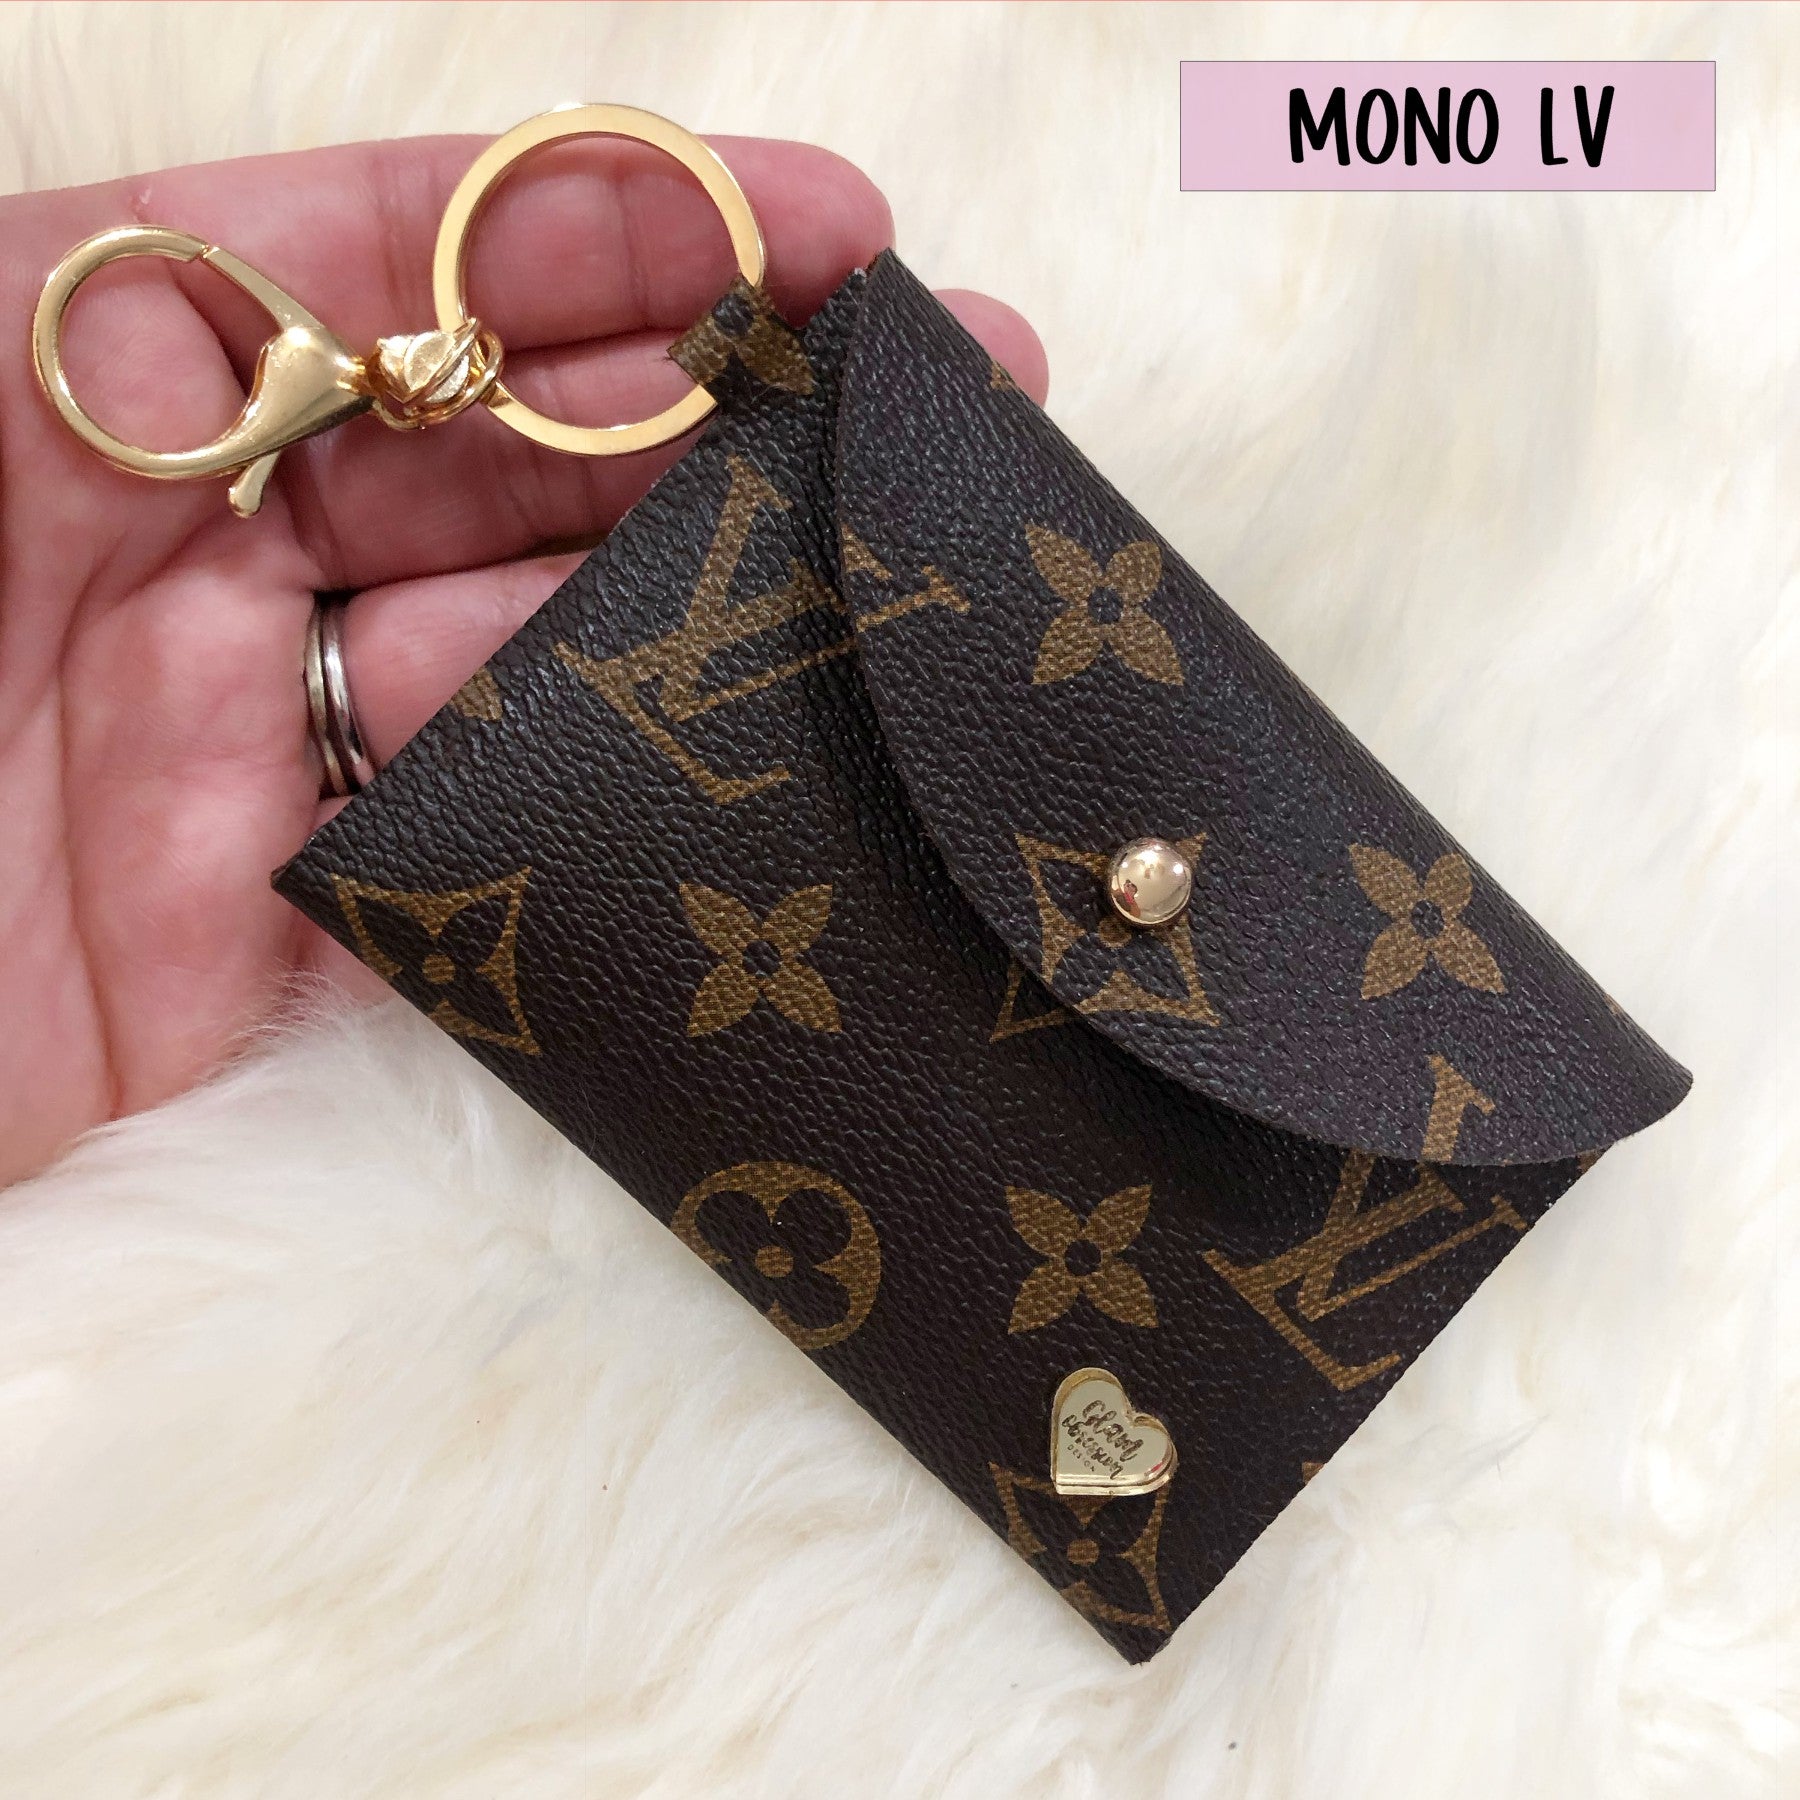 Louis Vuitton, Accessories, Kirigami Pouch Bag Charm And Key Holder